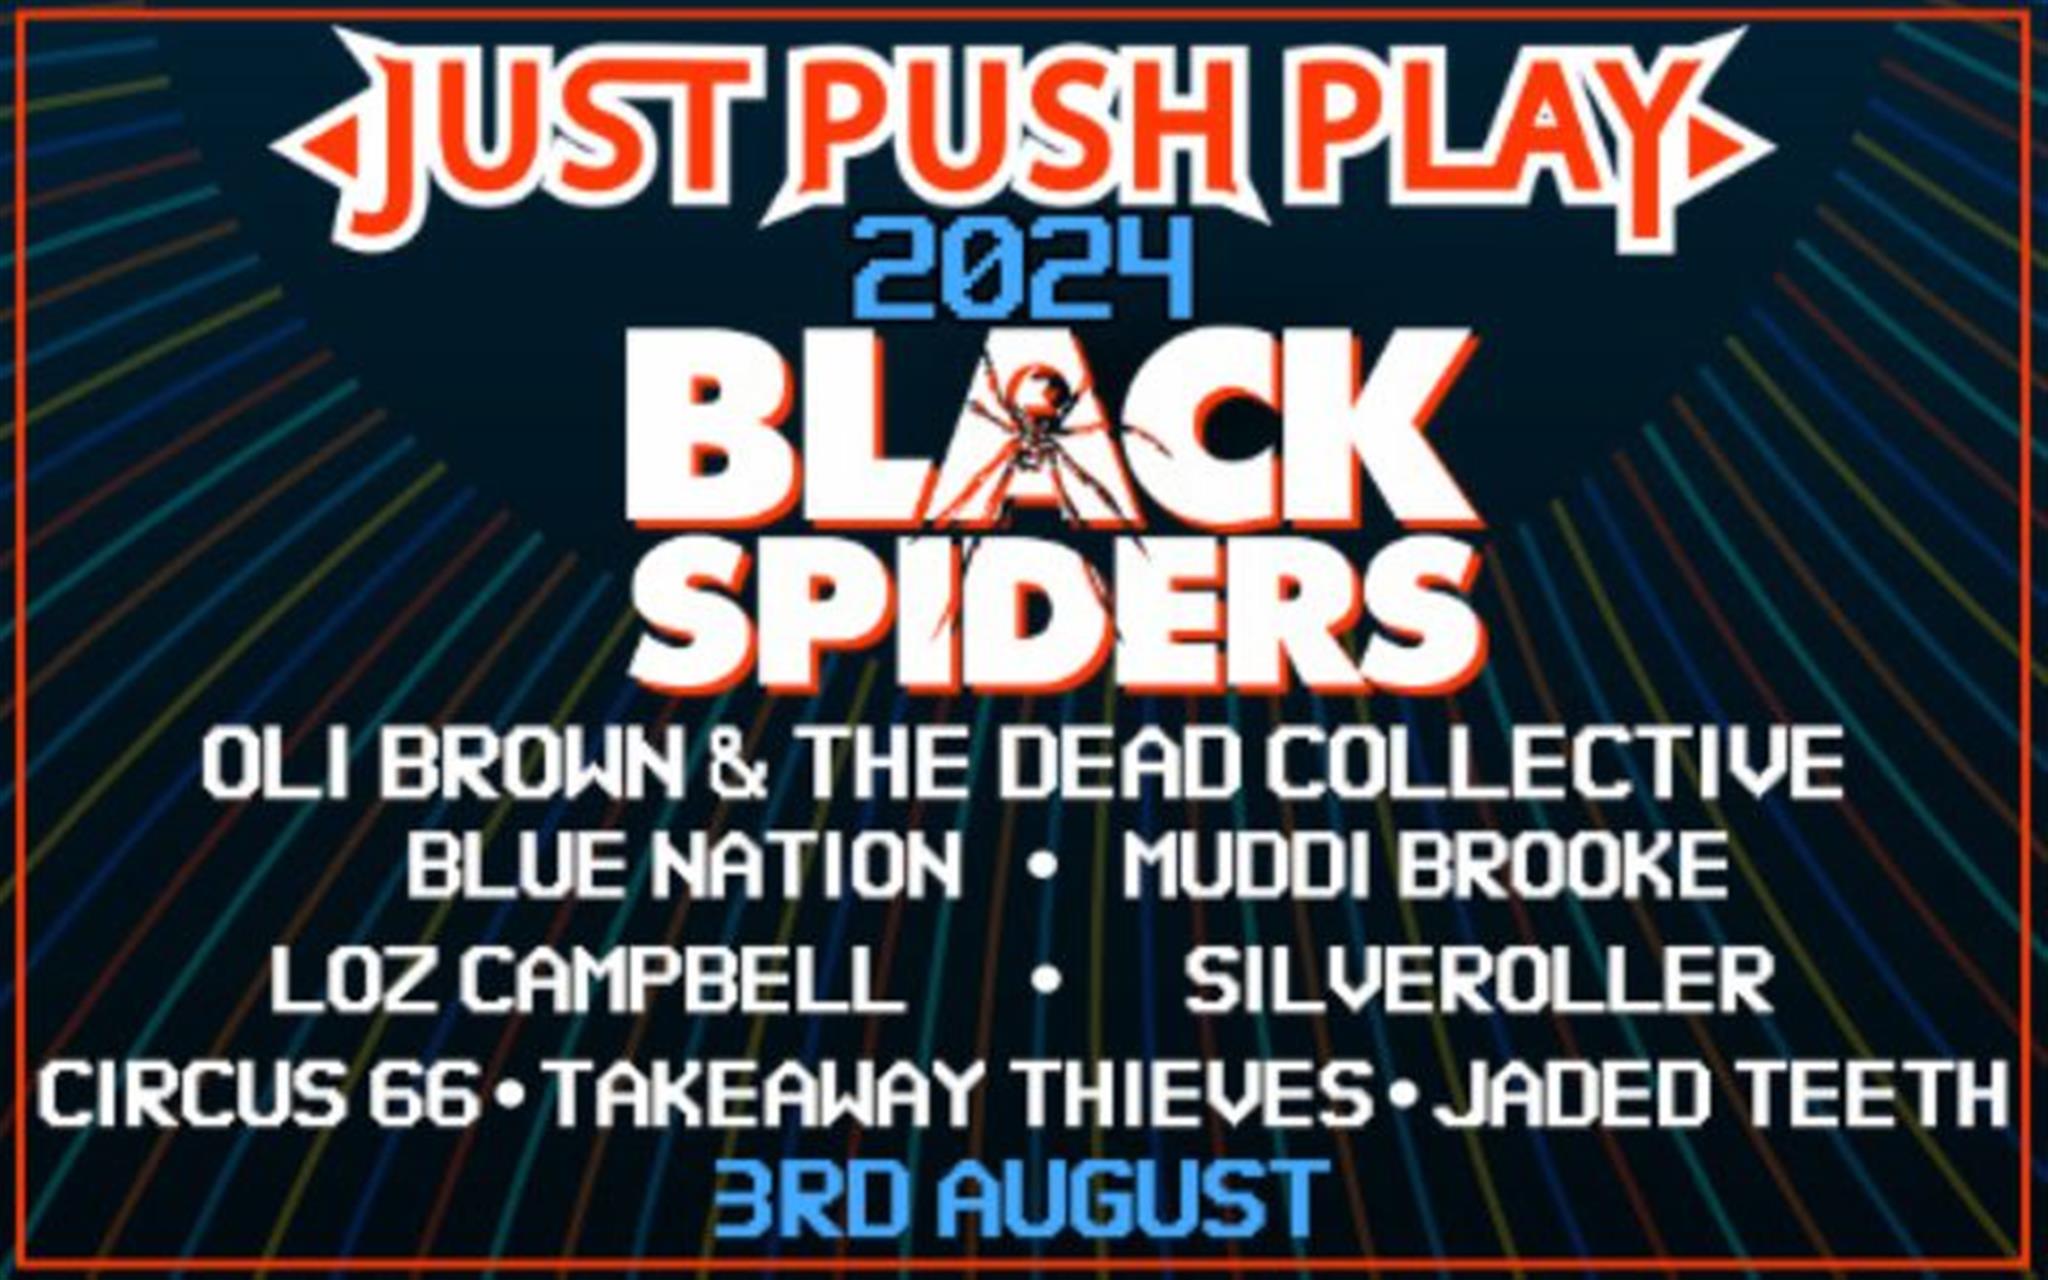 Just Push Play Festival image